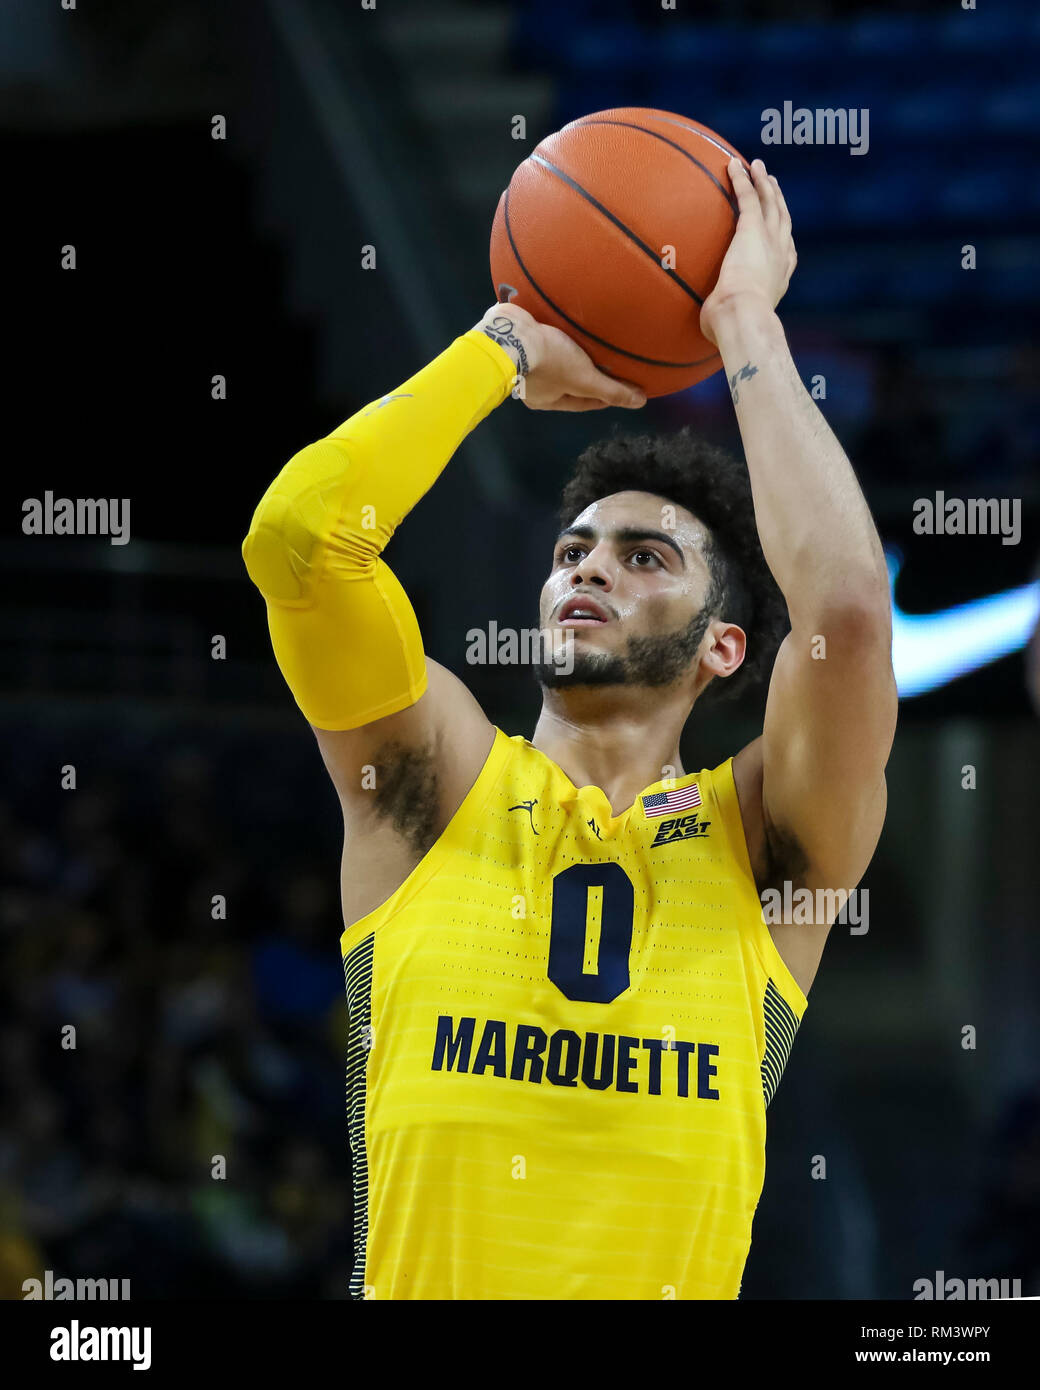 Chicago, USA. 12th Feb 2019. Marquette Golden Eagles guard Markus Howard (0) shoots a free throw during NCAA basketball game between the Marquette Golden Eagles and the DePaul University Blue Demons at Wintrust Arena in Chicago IL. Gary E. Duncan Sr/CSM Credit: Cal Sport Media/Alamy Live News Stock Photo